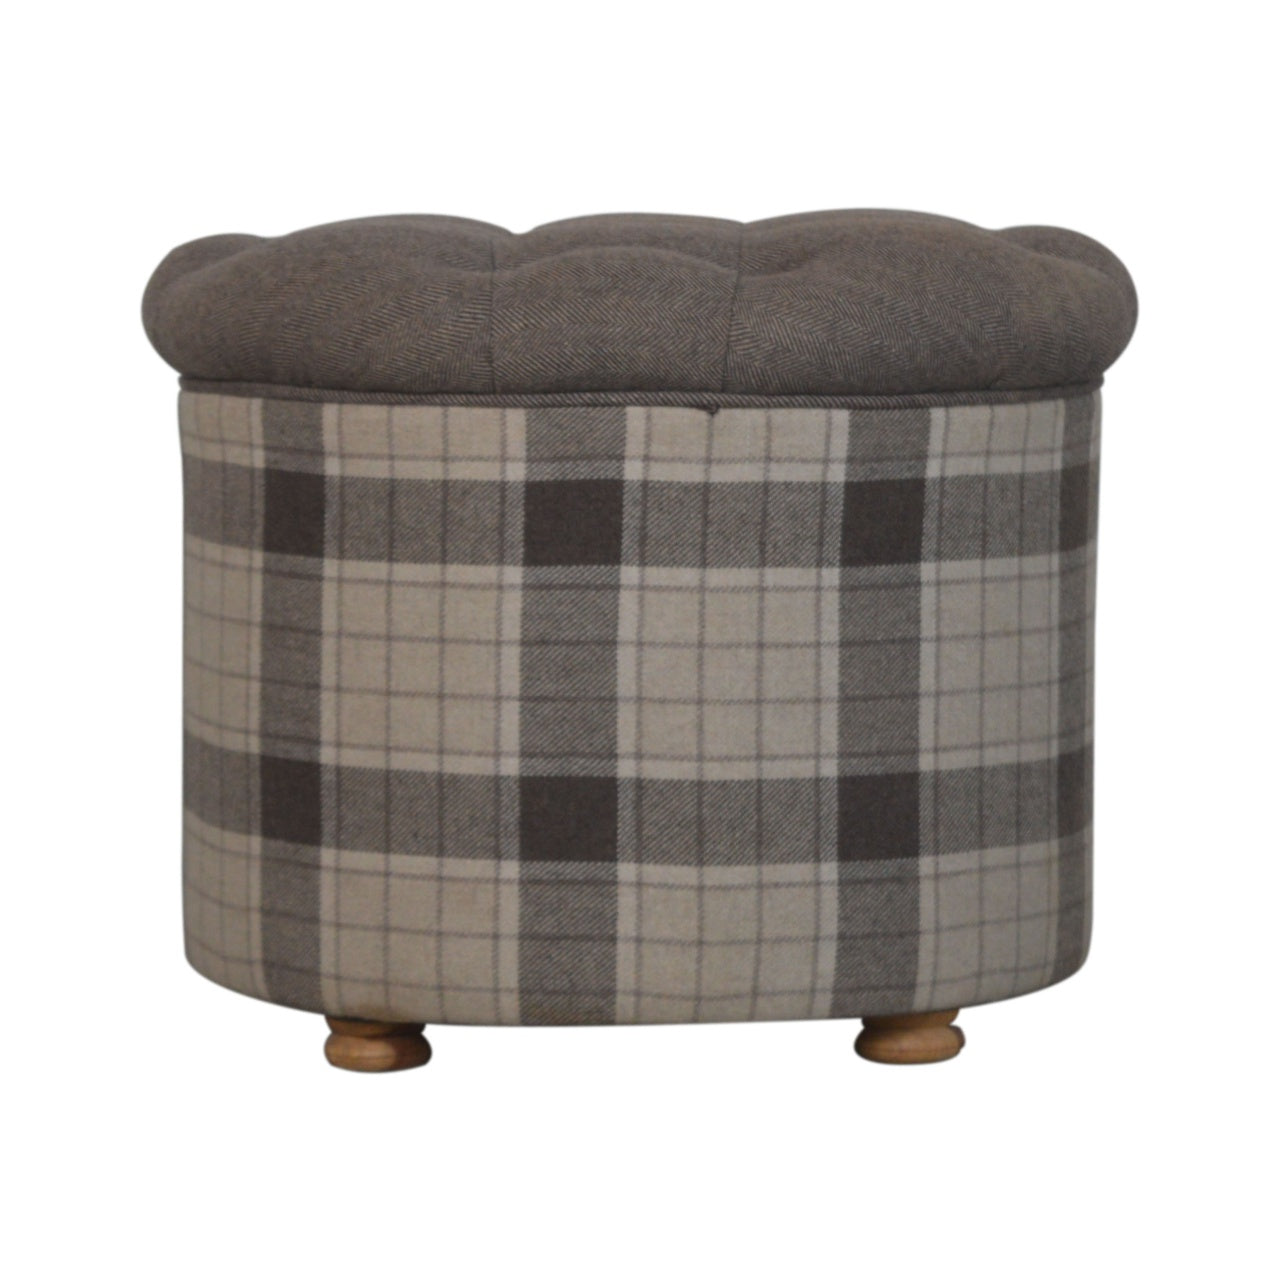 View Deep Button Round Checked Footstool information